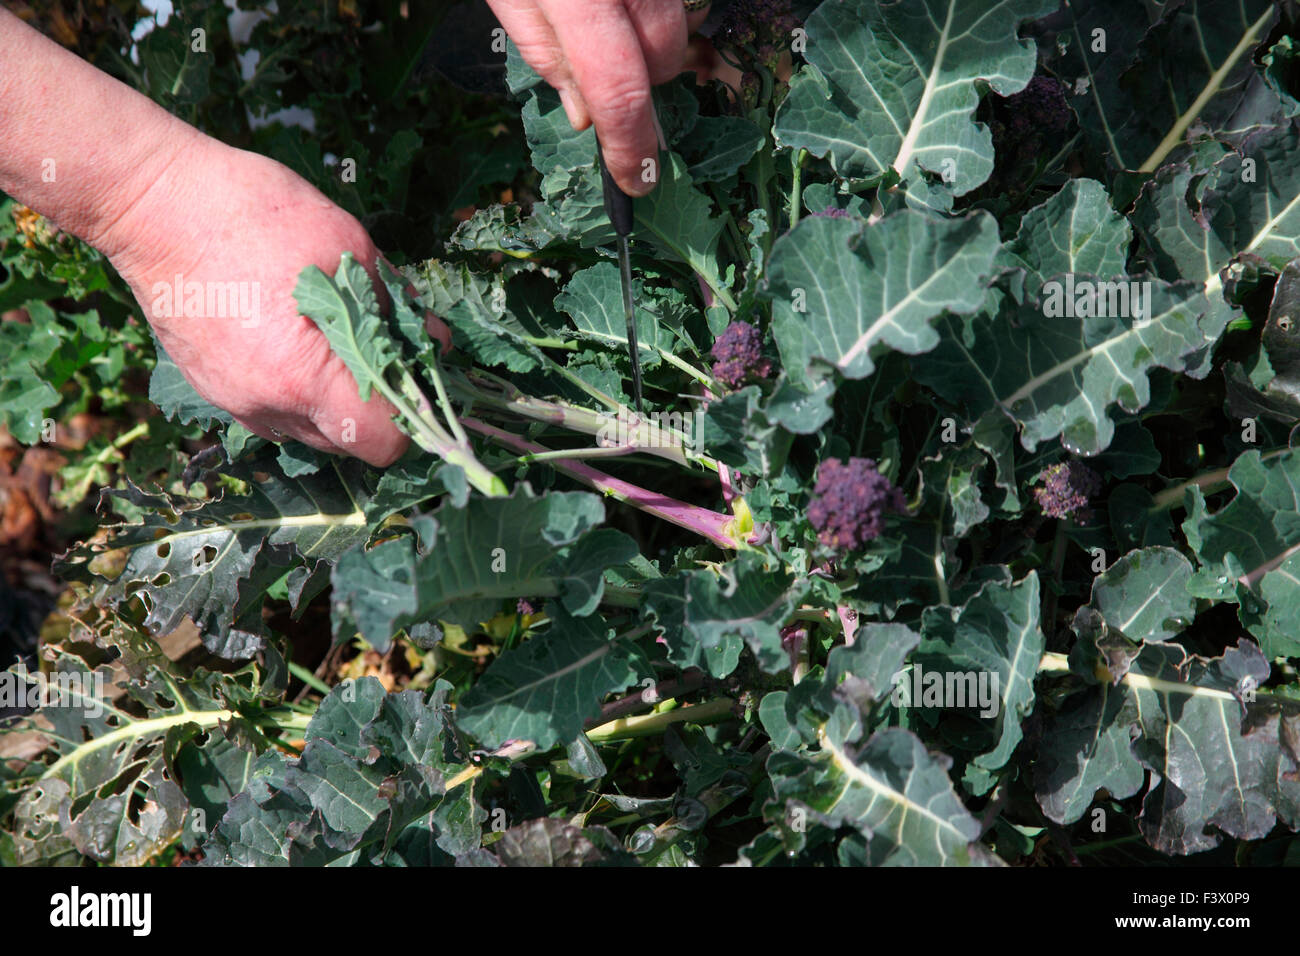 Brassica oleracea 'Purple Sprouting' Broccoli using a knife to harvest mature curds Stock Photo